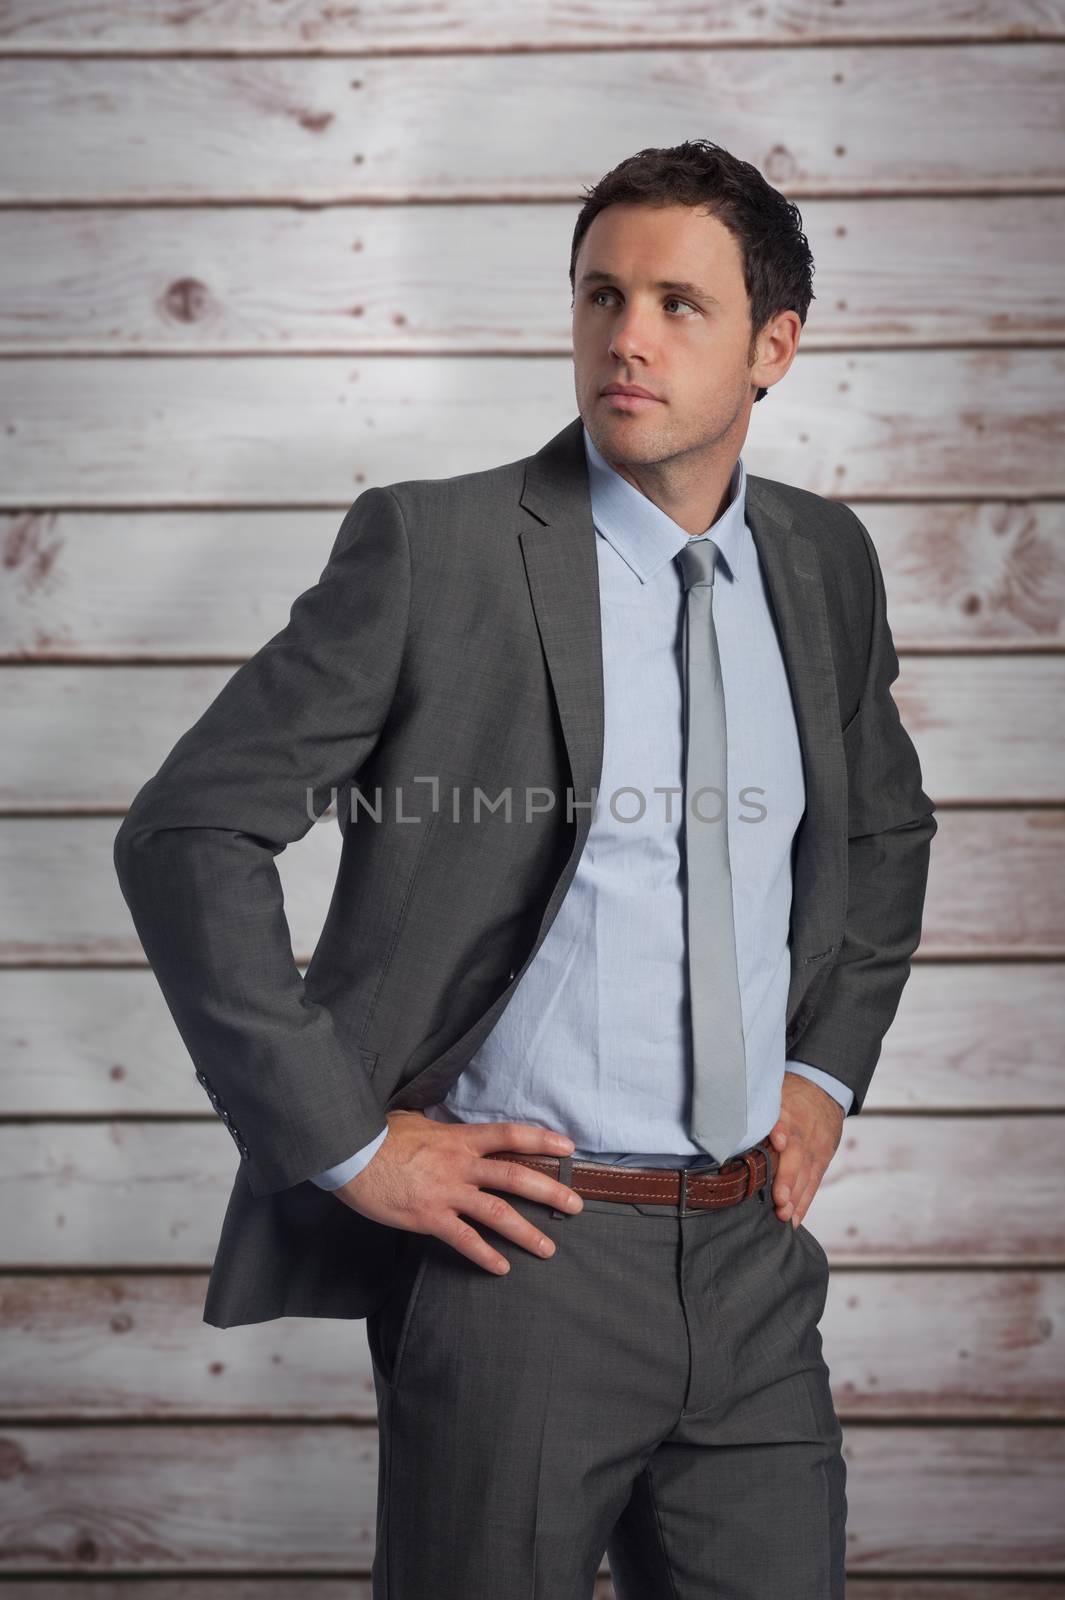 Serious businessman with hands on hips against wooden planks